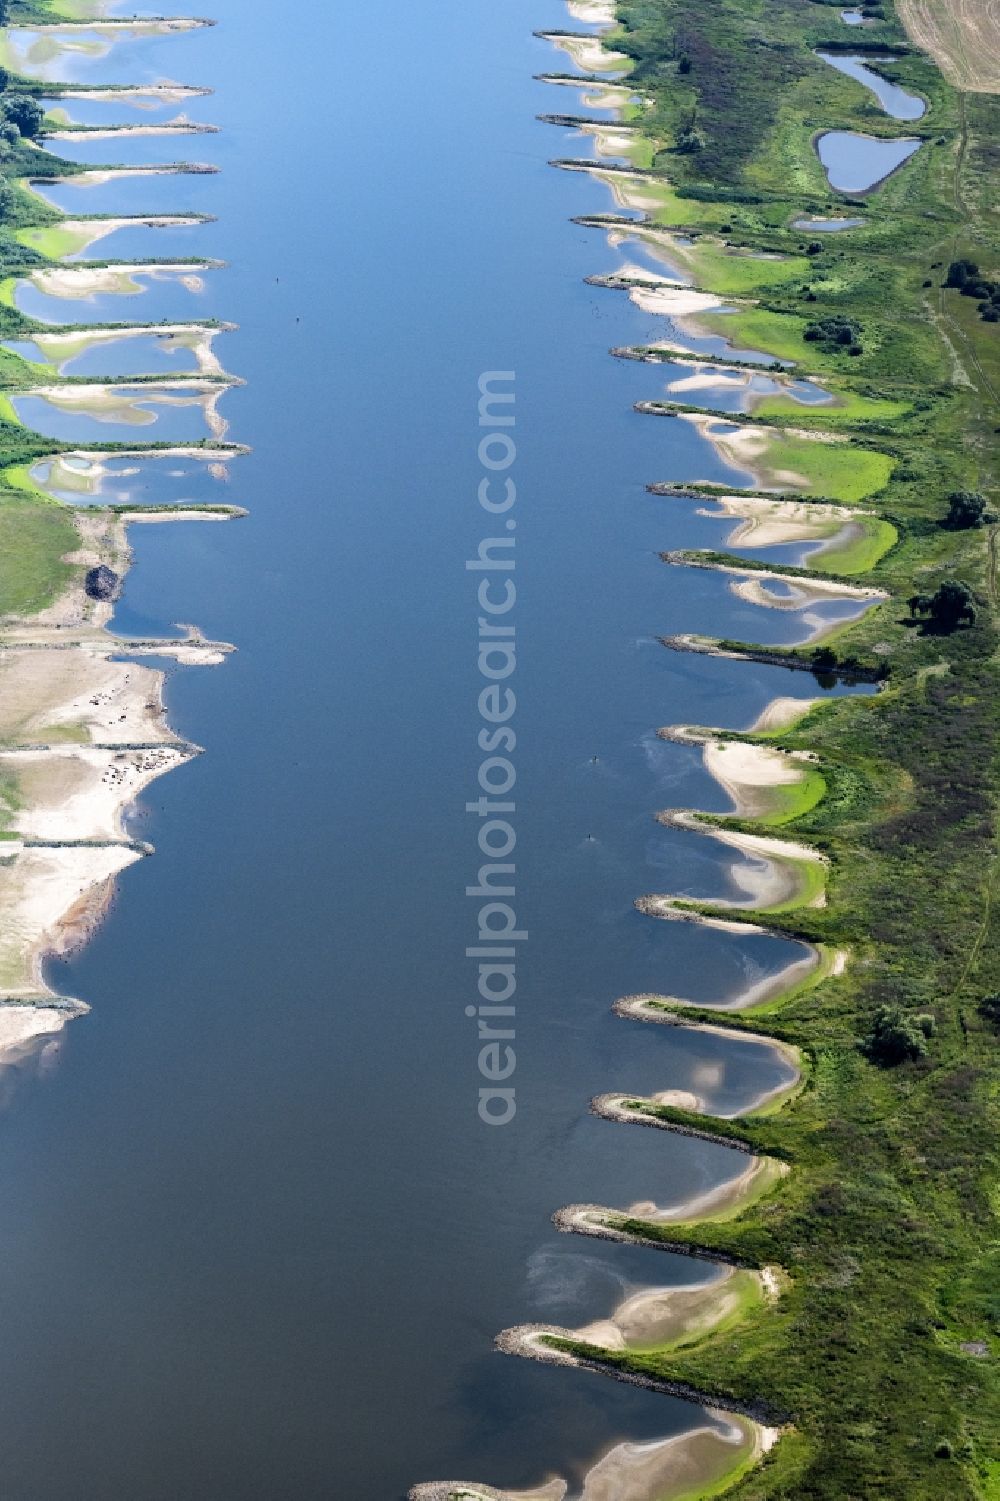 Aerial image Schönberg - Groyne head of the of the River Elbe river course in Schoenberg in the state Saxony-Anhalt, Germany